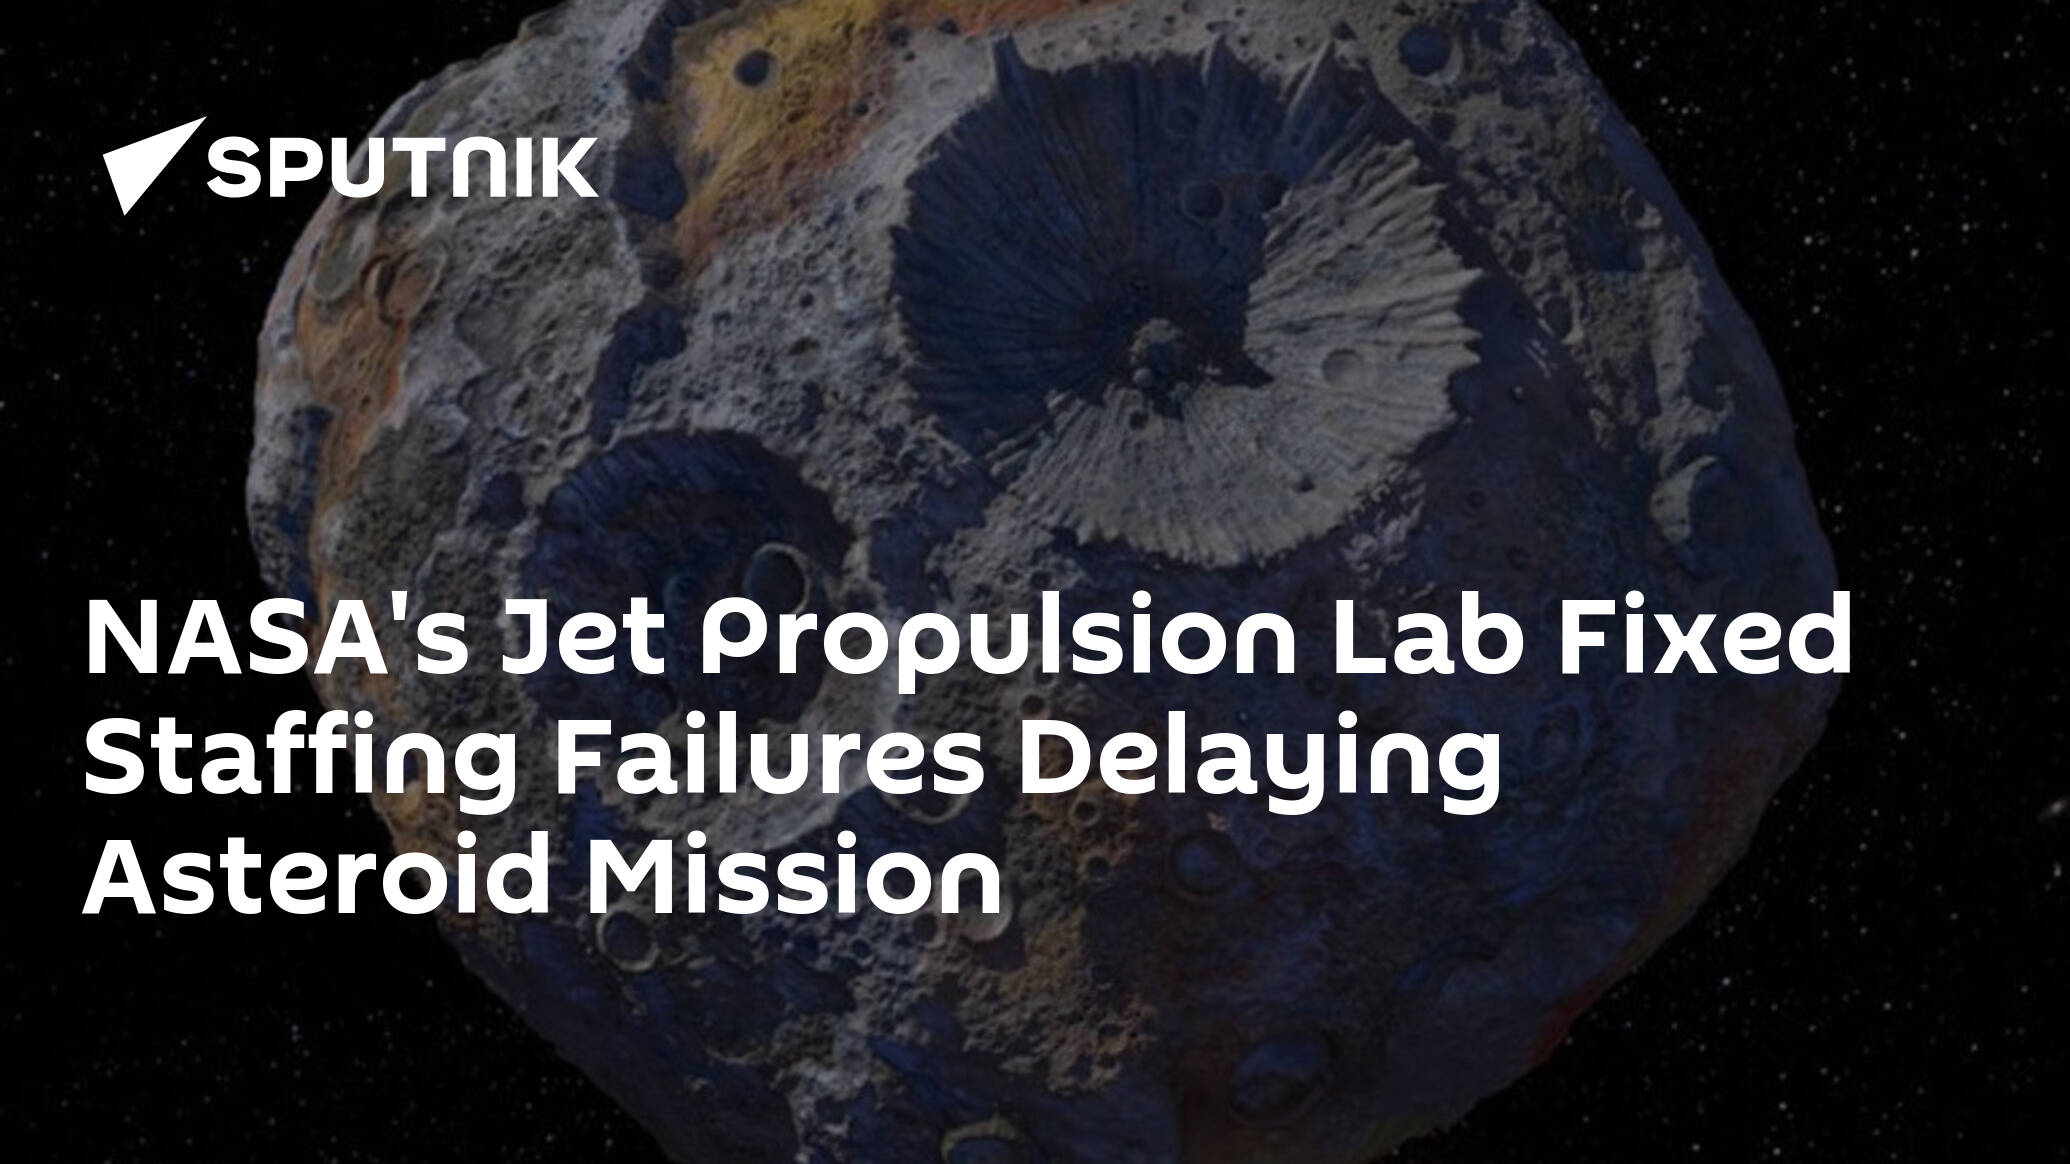 NASA's Jet Propulsion Lab Fixed Staffing Failures Delaying Asteroid Mission